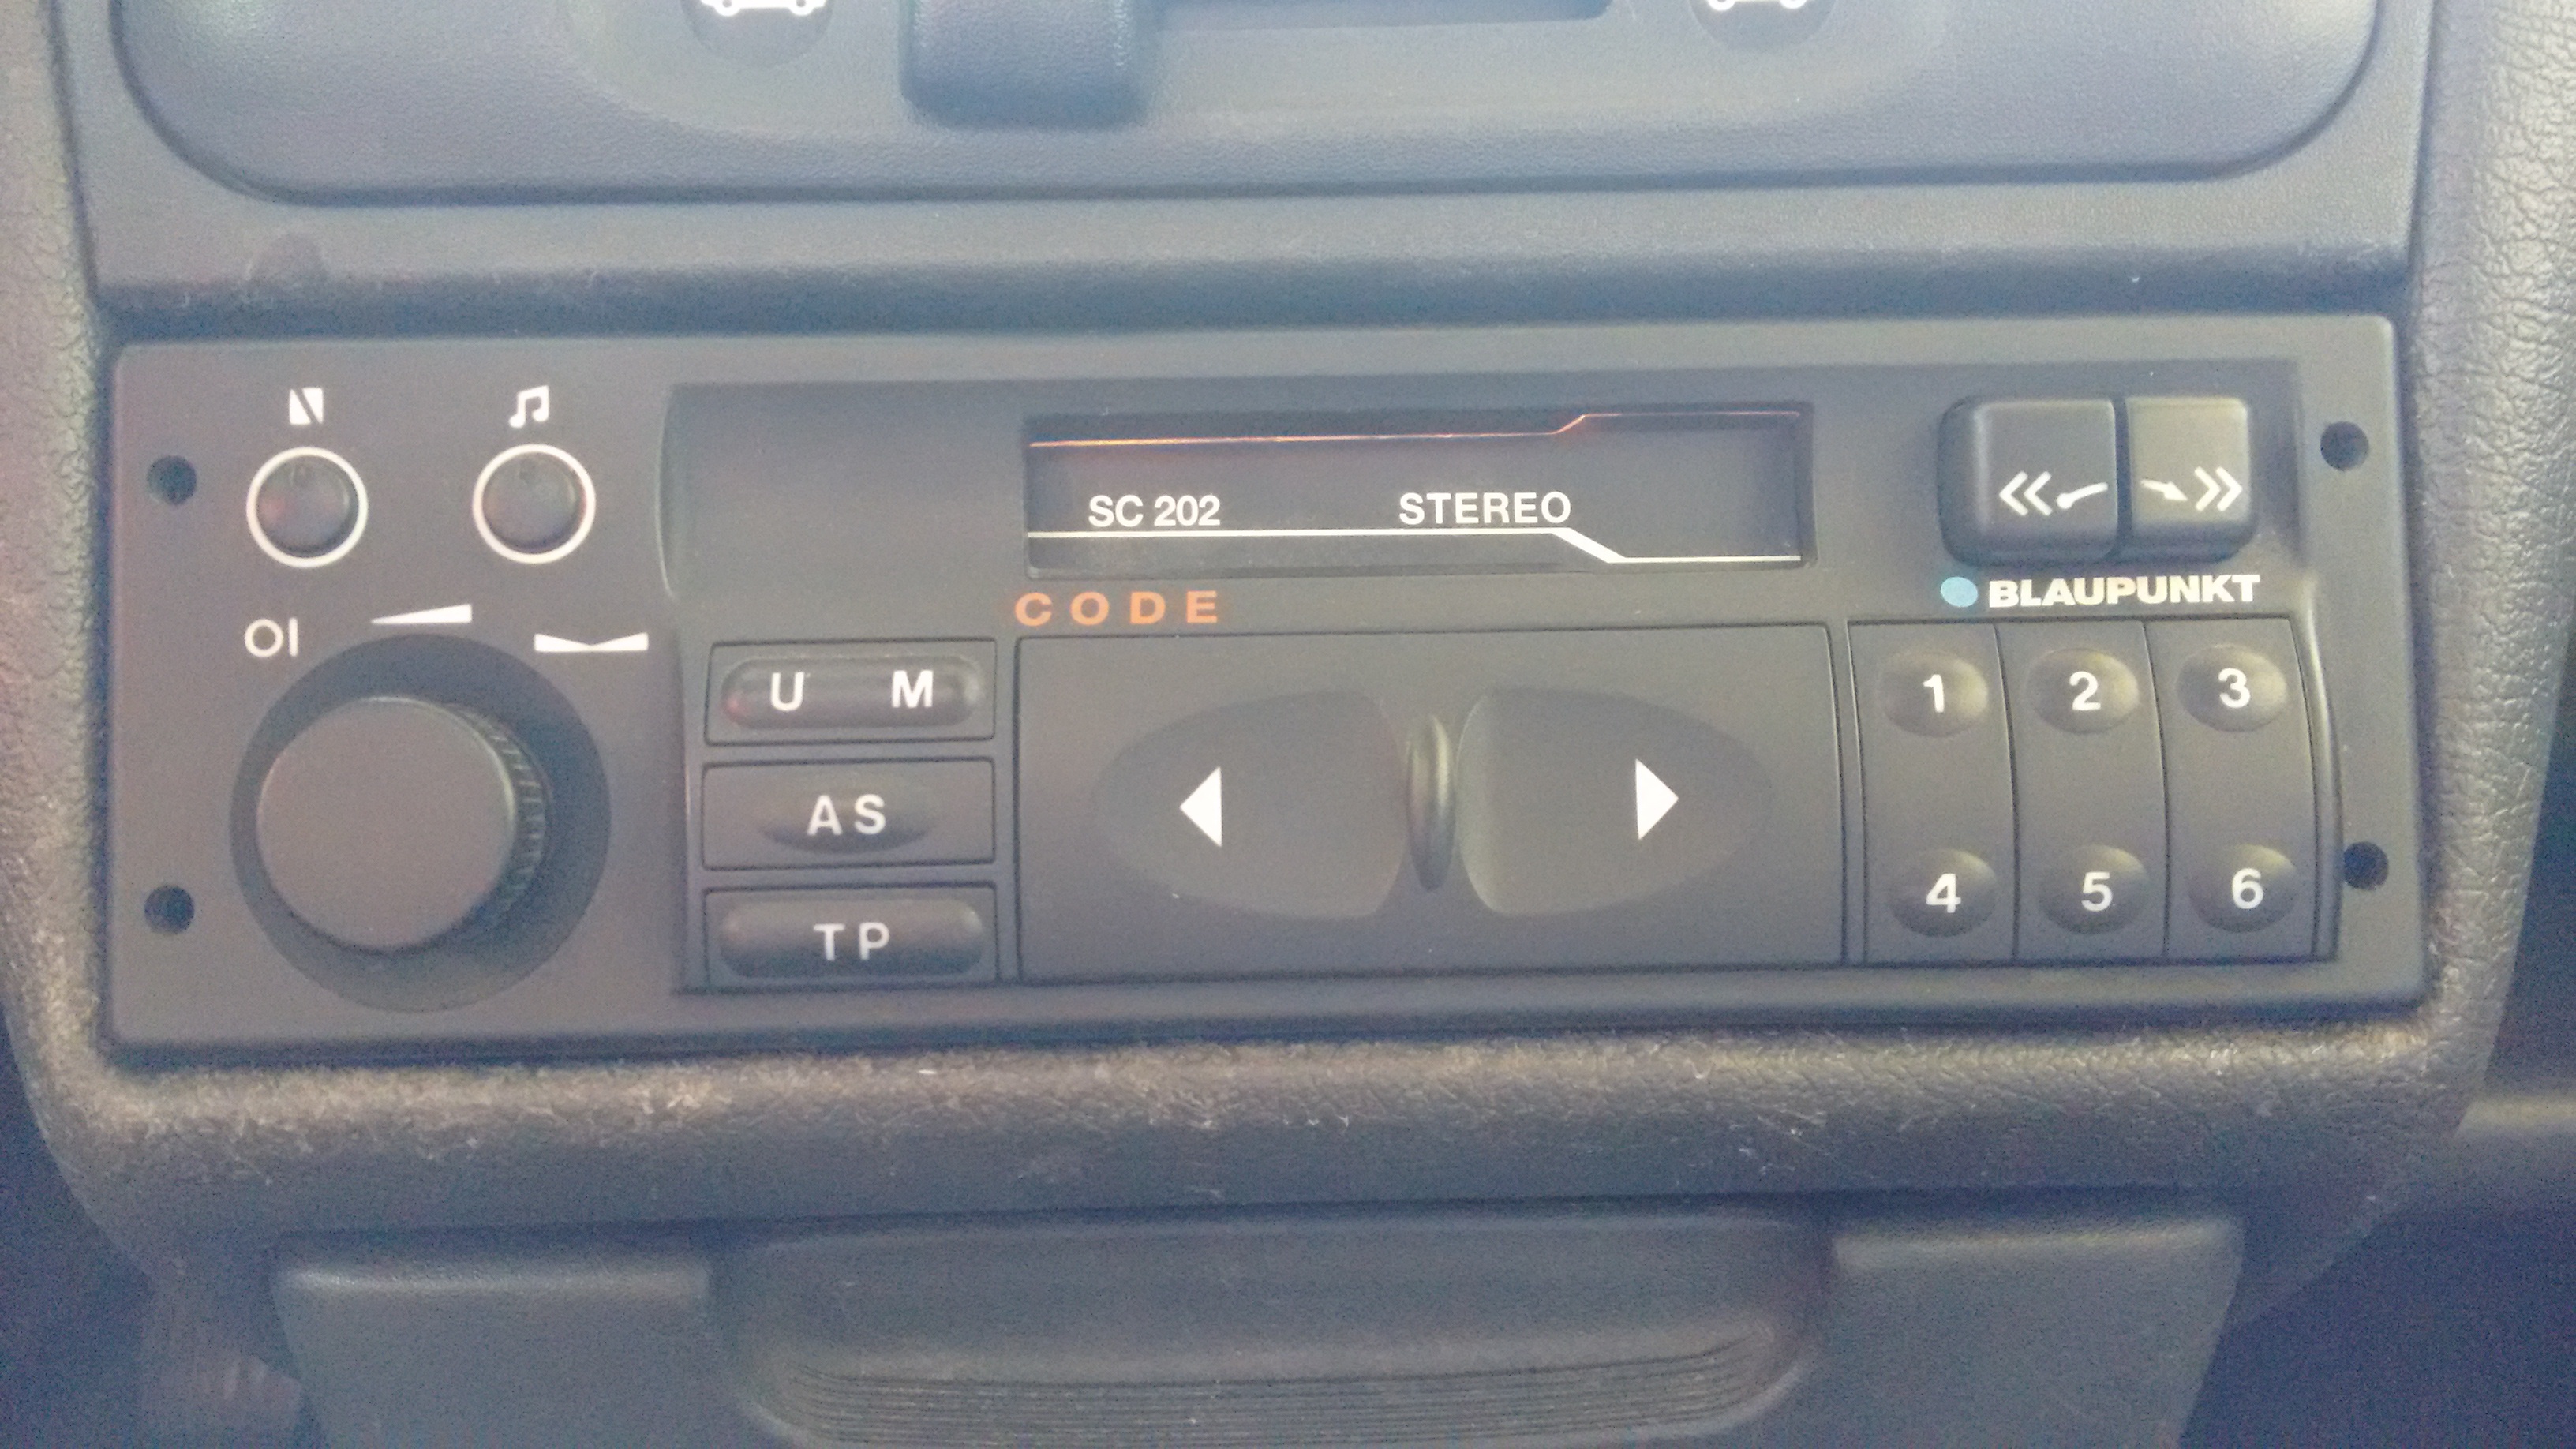 Rusty imply typhoon Opel Corsa B - The display does not show the radio frequency